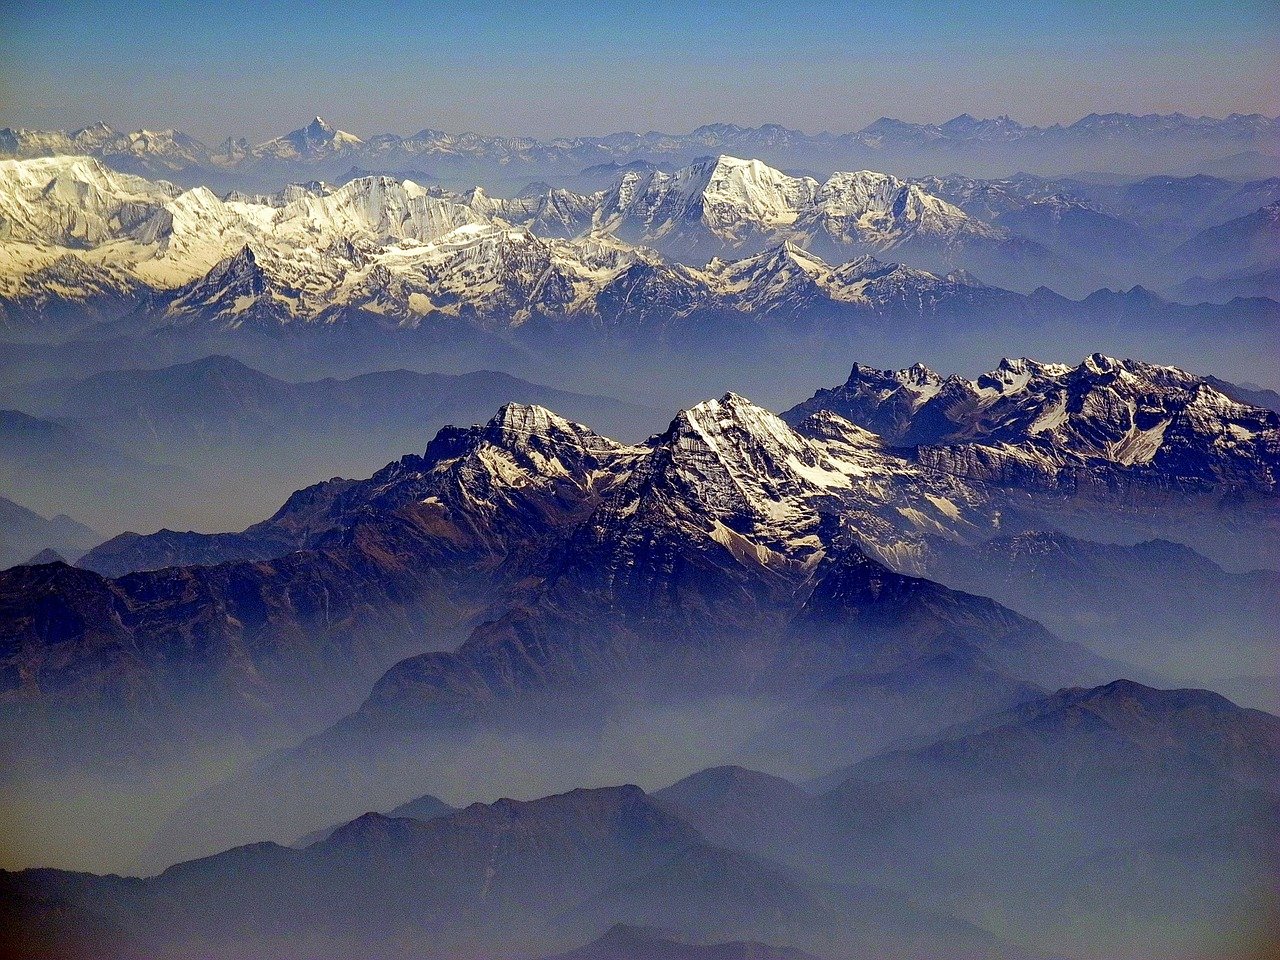 Study Pinpoints Sources for Aerosol Over Central Himalayan Region